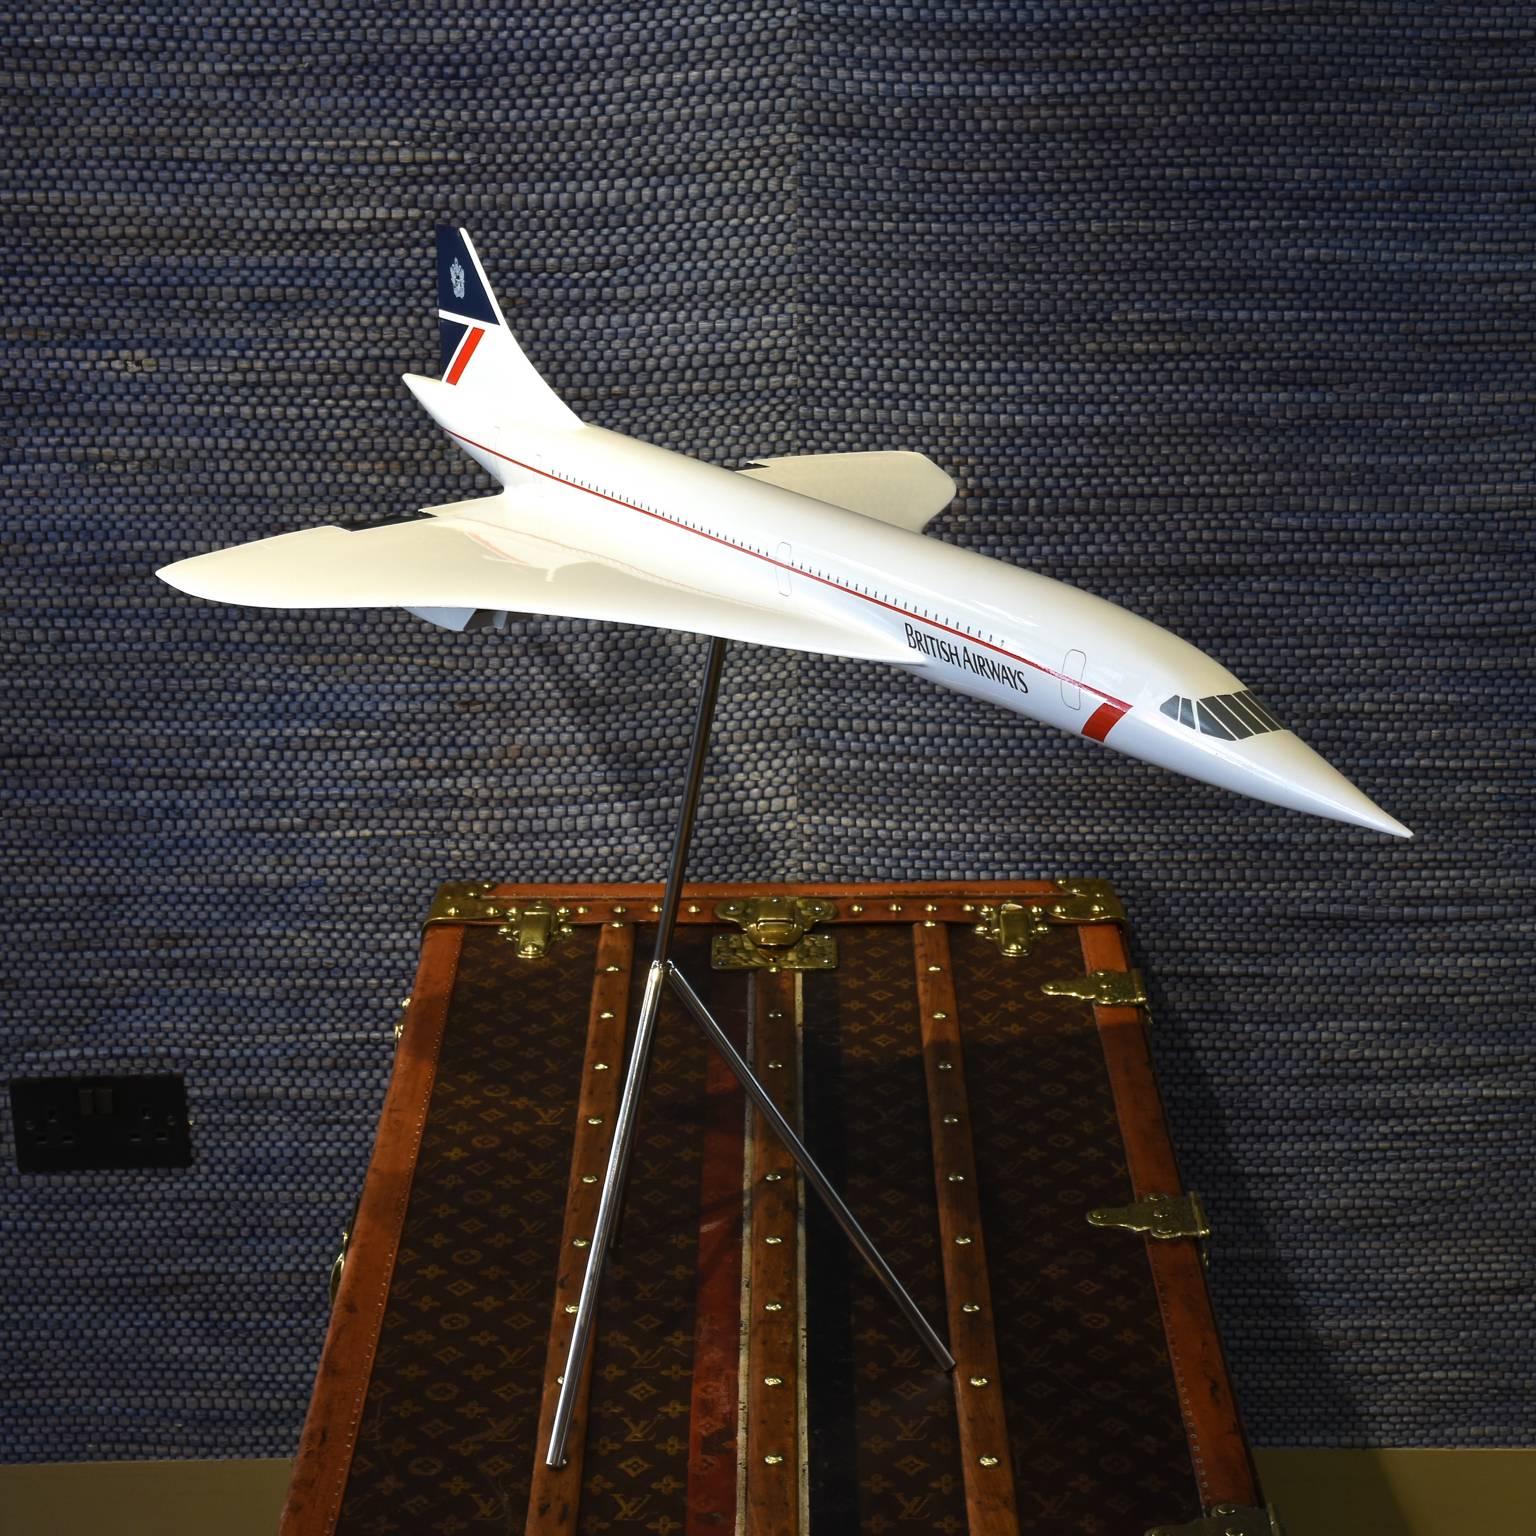 A wonderful quality 1:50 scale fibreglass and resin painted model Concorde in amazing condition, by renowned model makers Space Models, circa 1990. Decorated in BA’s 'Landor' livery design for the supersonic aircraft. Mounted on a later metal